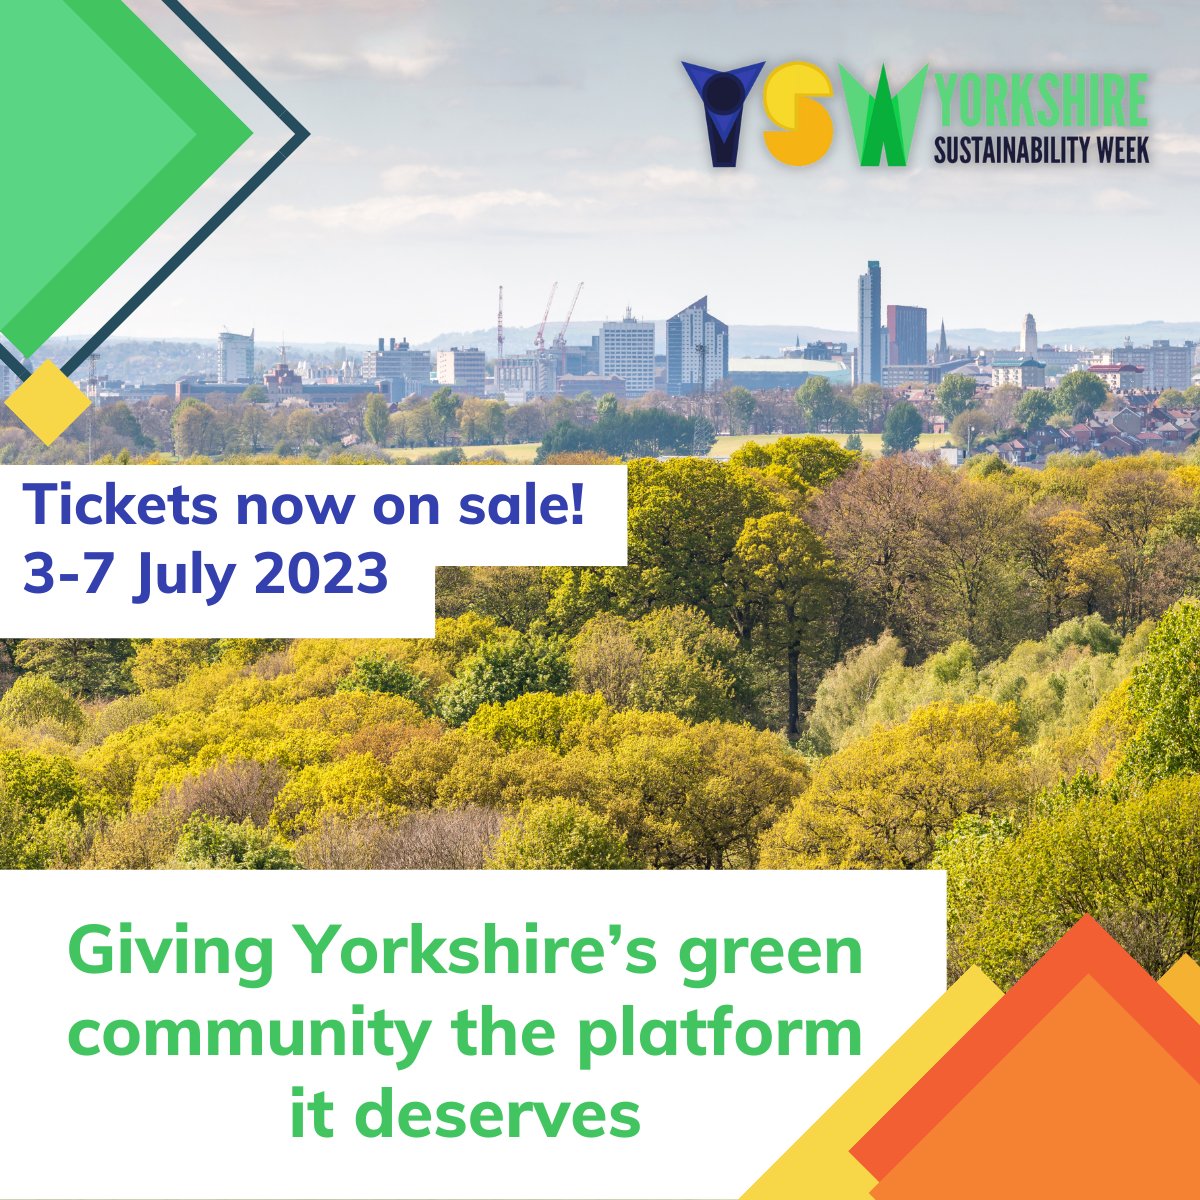 🥳 Yorkshire's first sustainability week is taking place 3 to 7 July 2023 with a series of panels, workshops, and talks by sustainability trailblazers taking place across the region! Book your free ticket for the launch on Thurs 23 May share-eu1.hsforms.com/1sUQFbP_tQomXa…